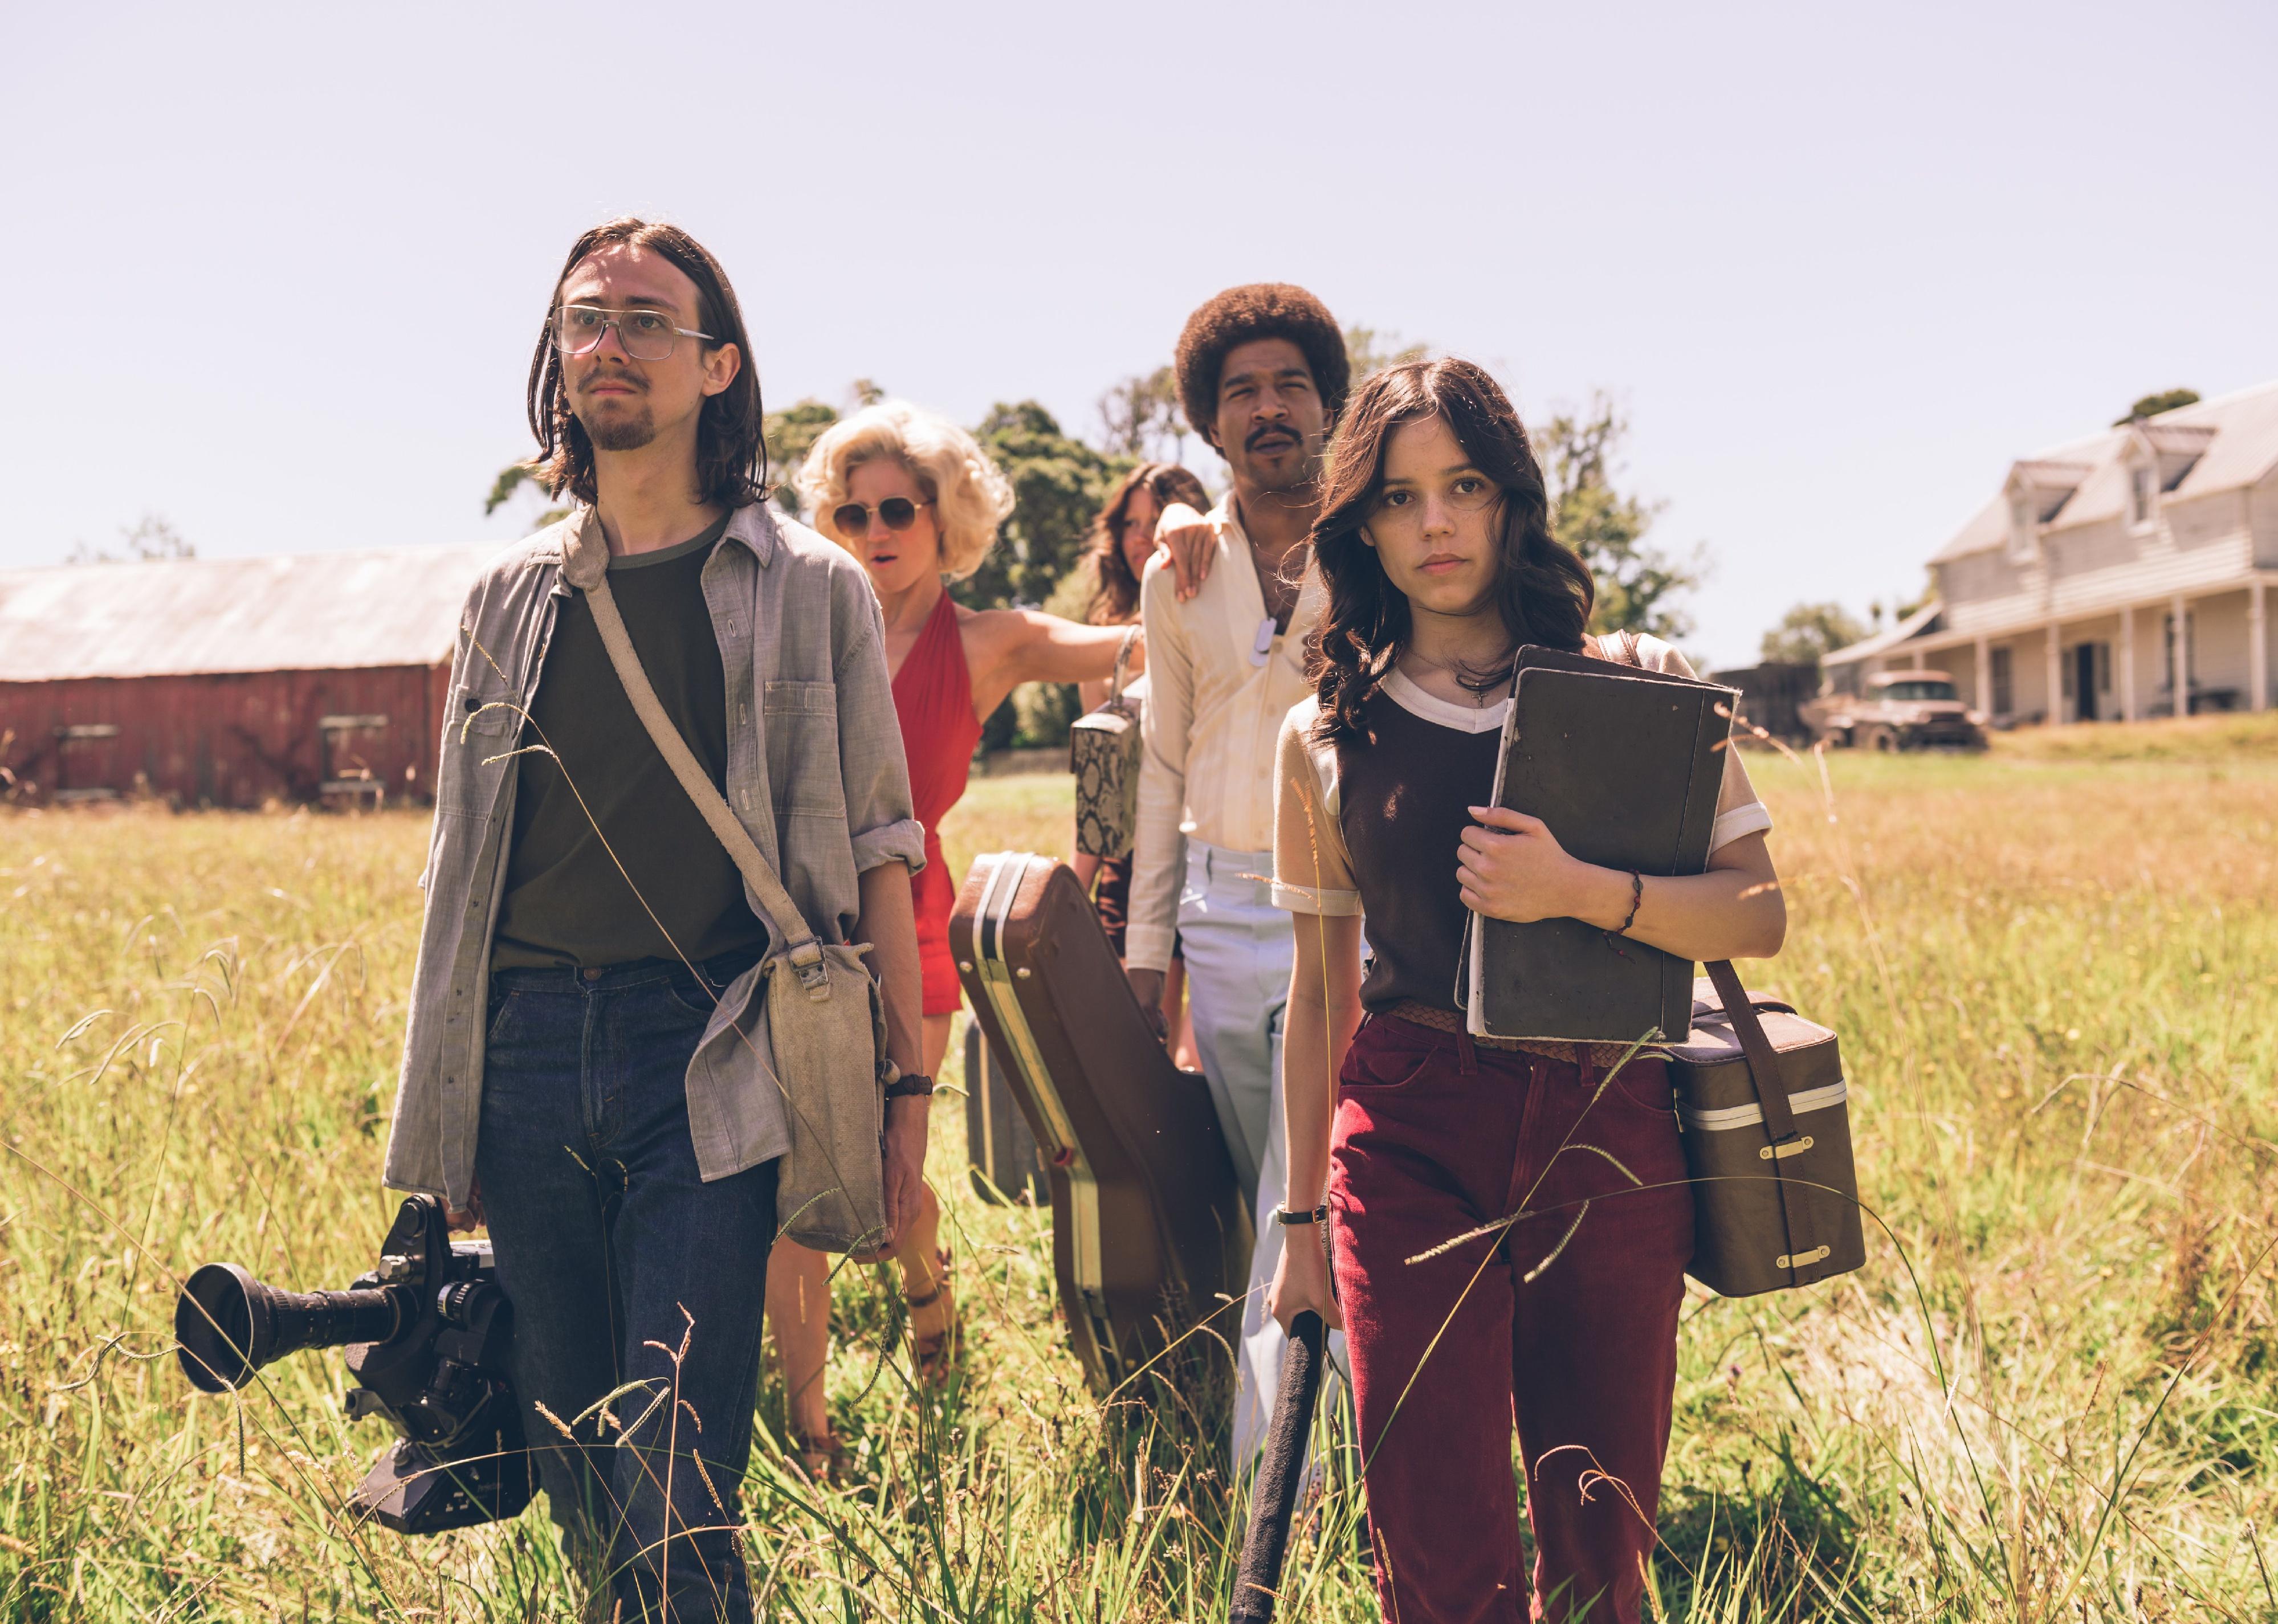 A group of filmmakers and castmembers walk through a field by a red barn carrying film equipment.